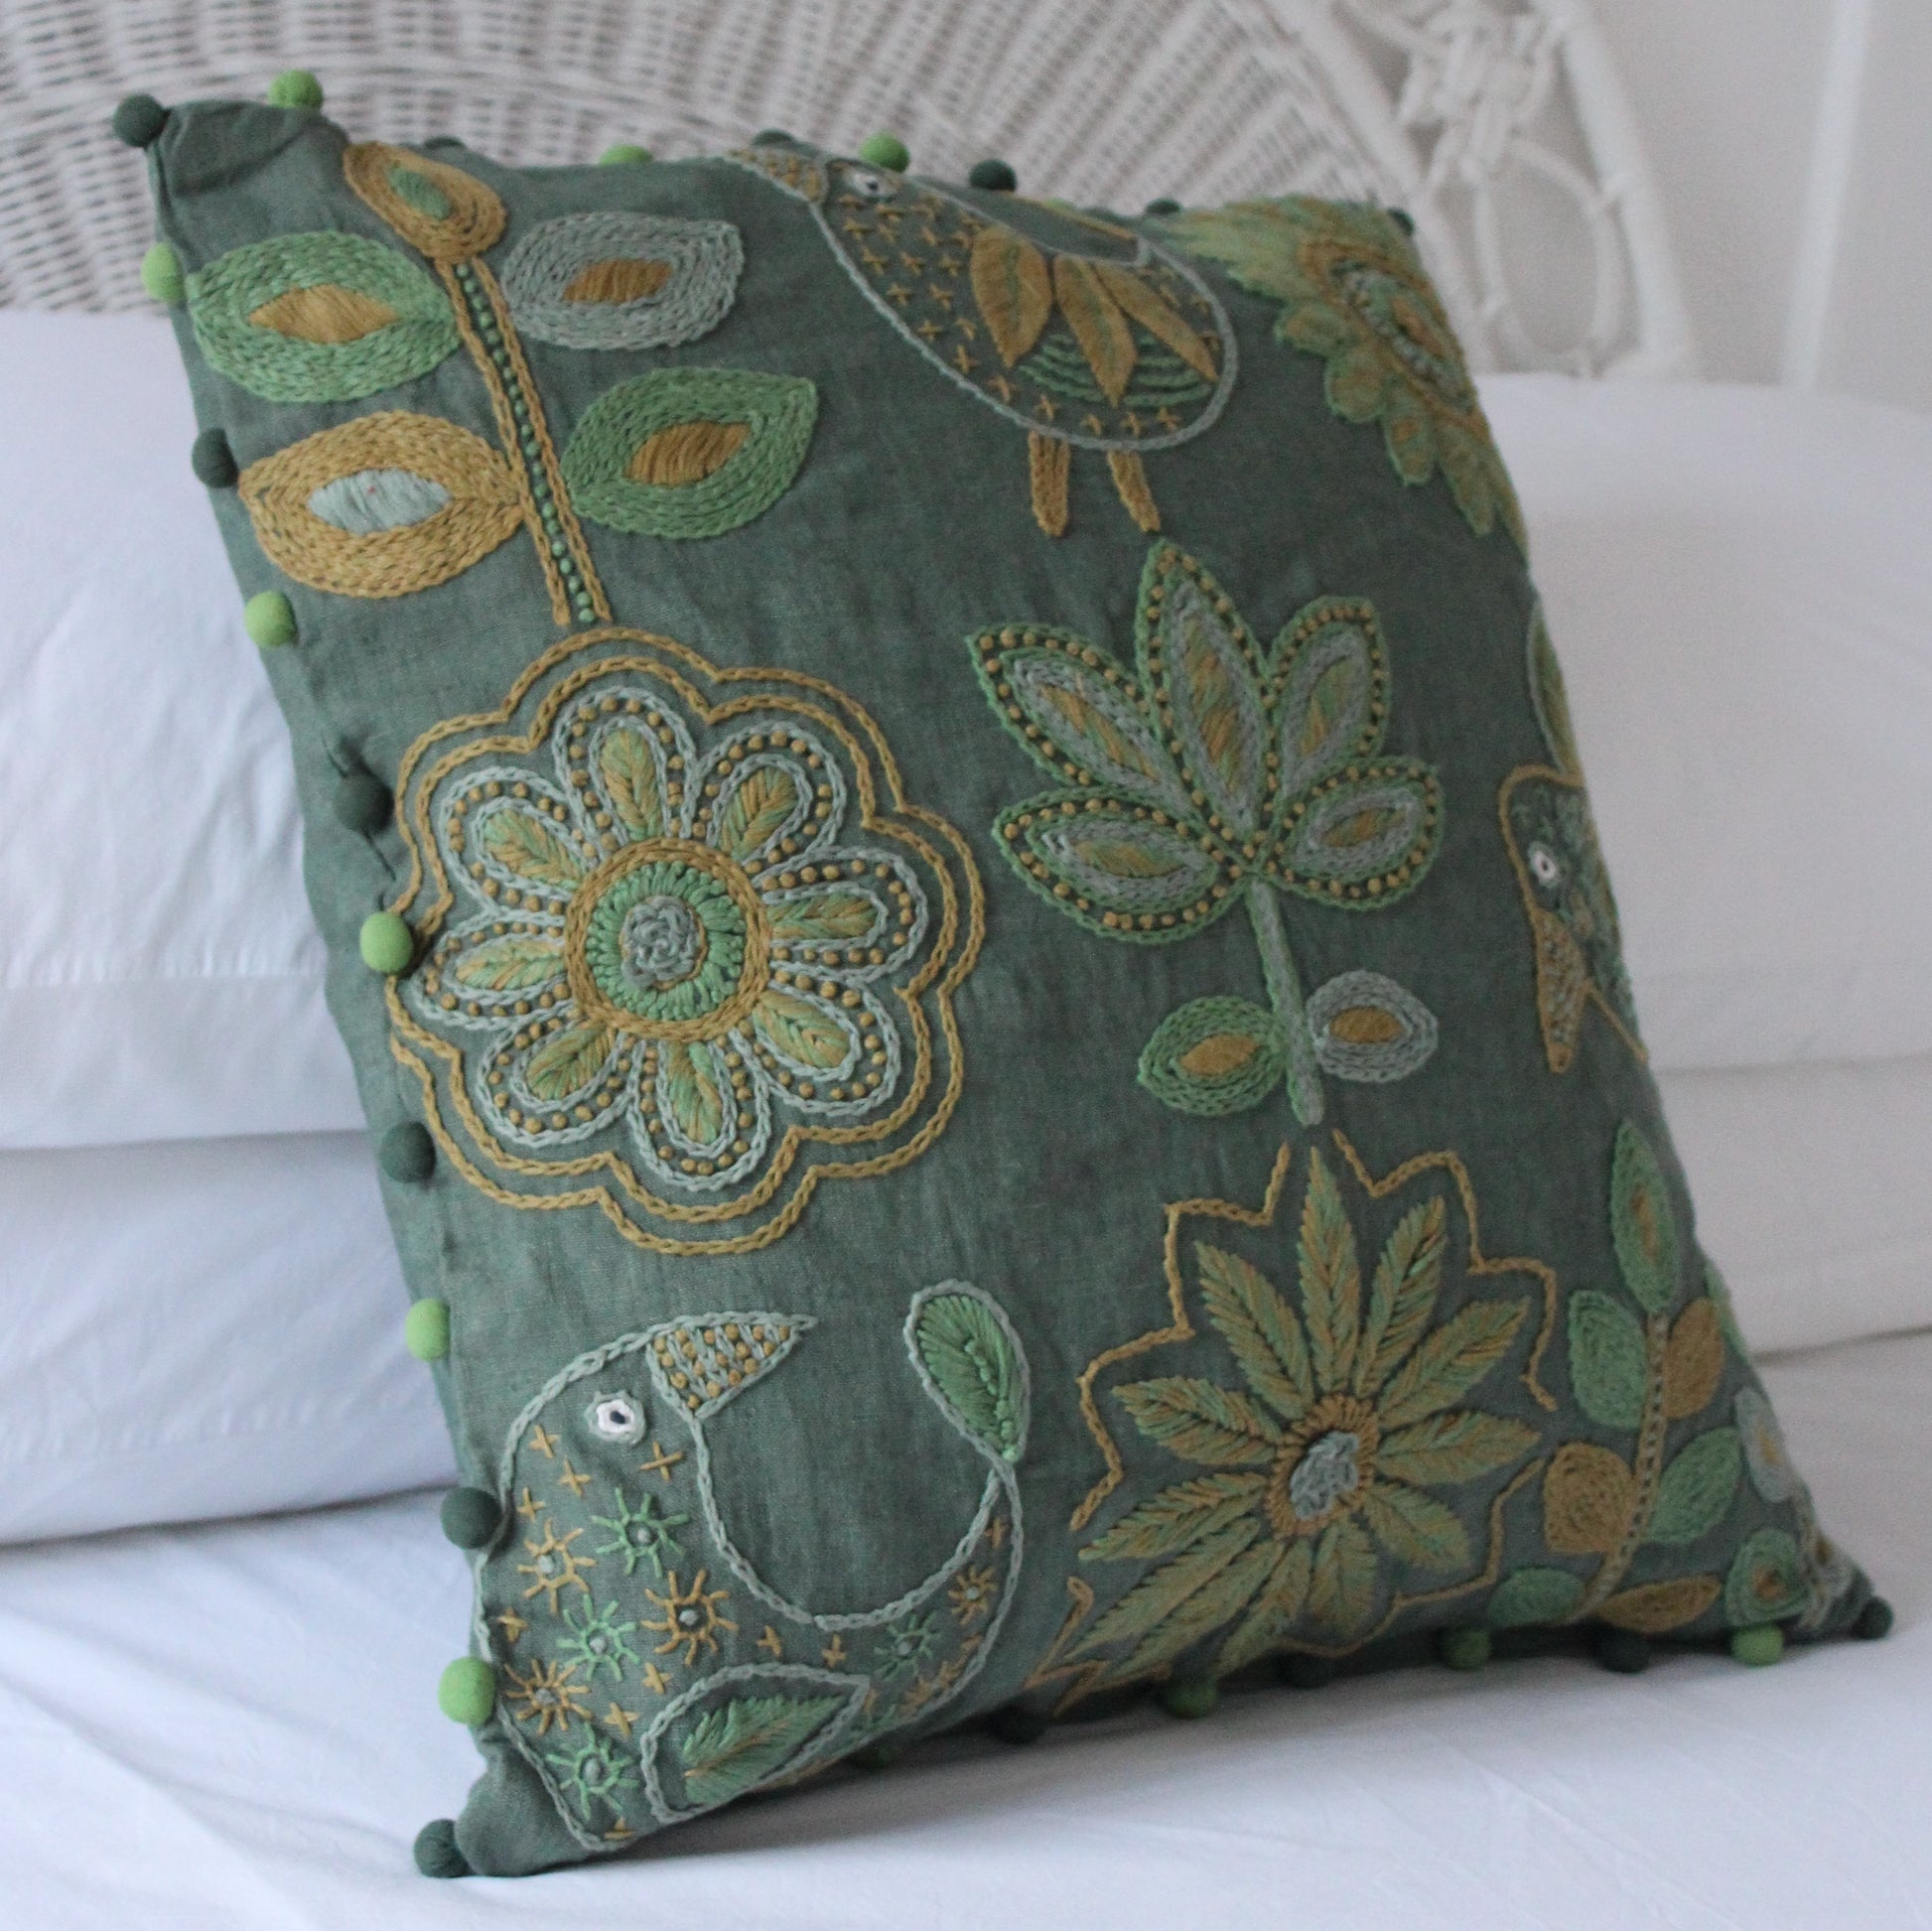 Eden Hand Embroidered Square Linen Cushion